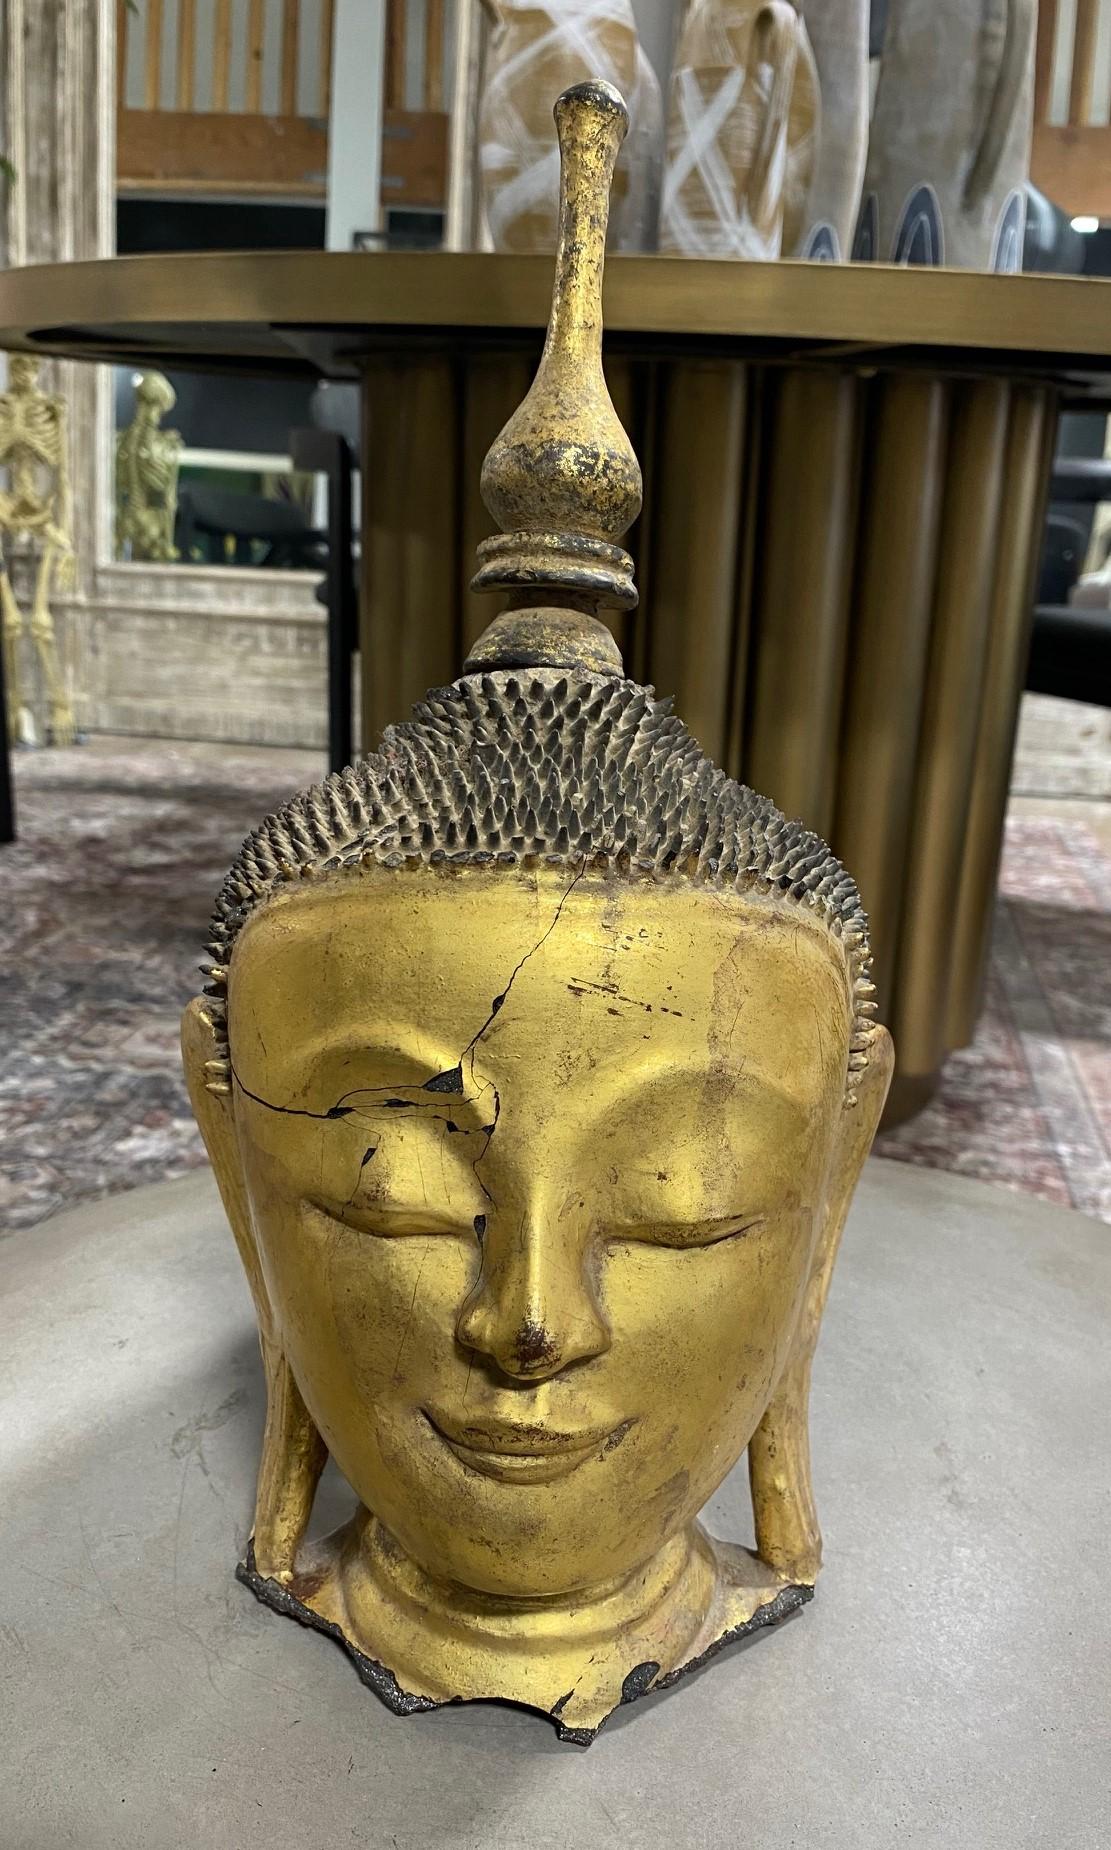 An exceptionally beautiful, serene, delicately crafted, and extremely rare Burmese Buddha head/bust - hand-made using the ancient Thayo technique which entails using a lacquer paste made by mixing lacquer with wood ash, rice husk, bone powder, and